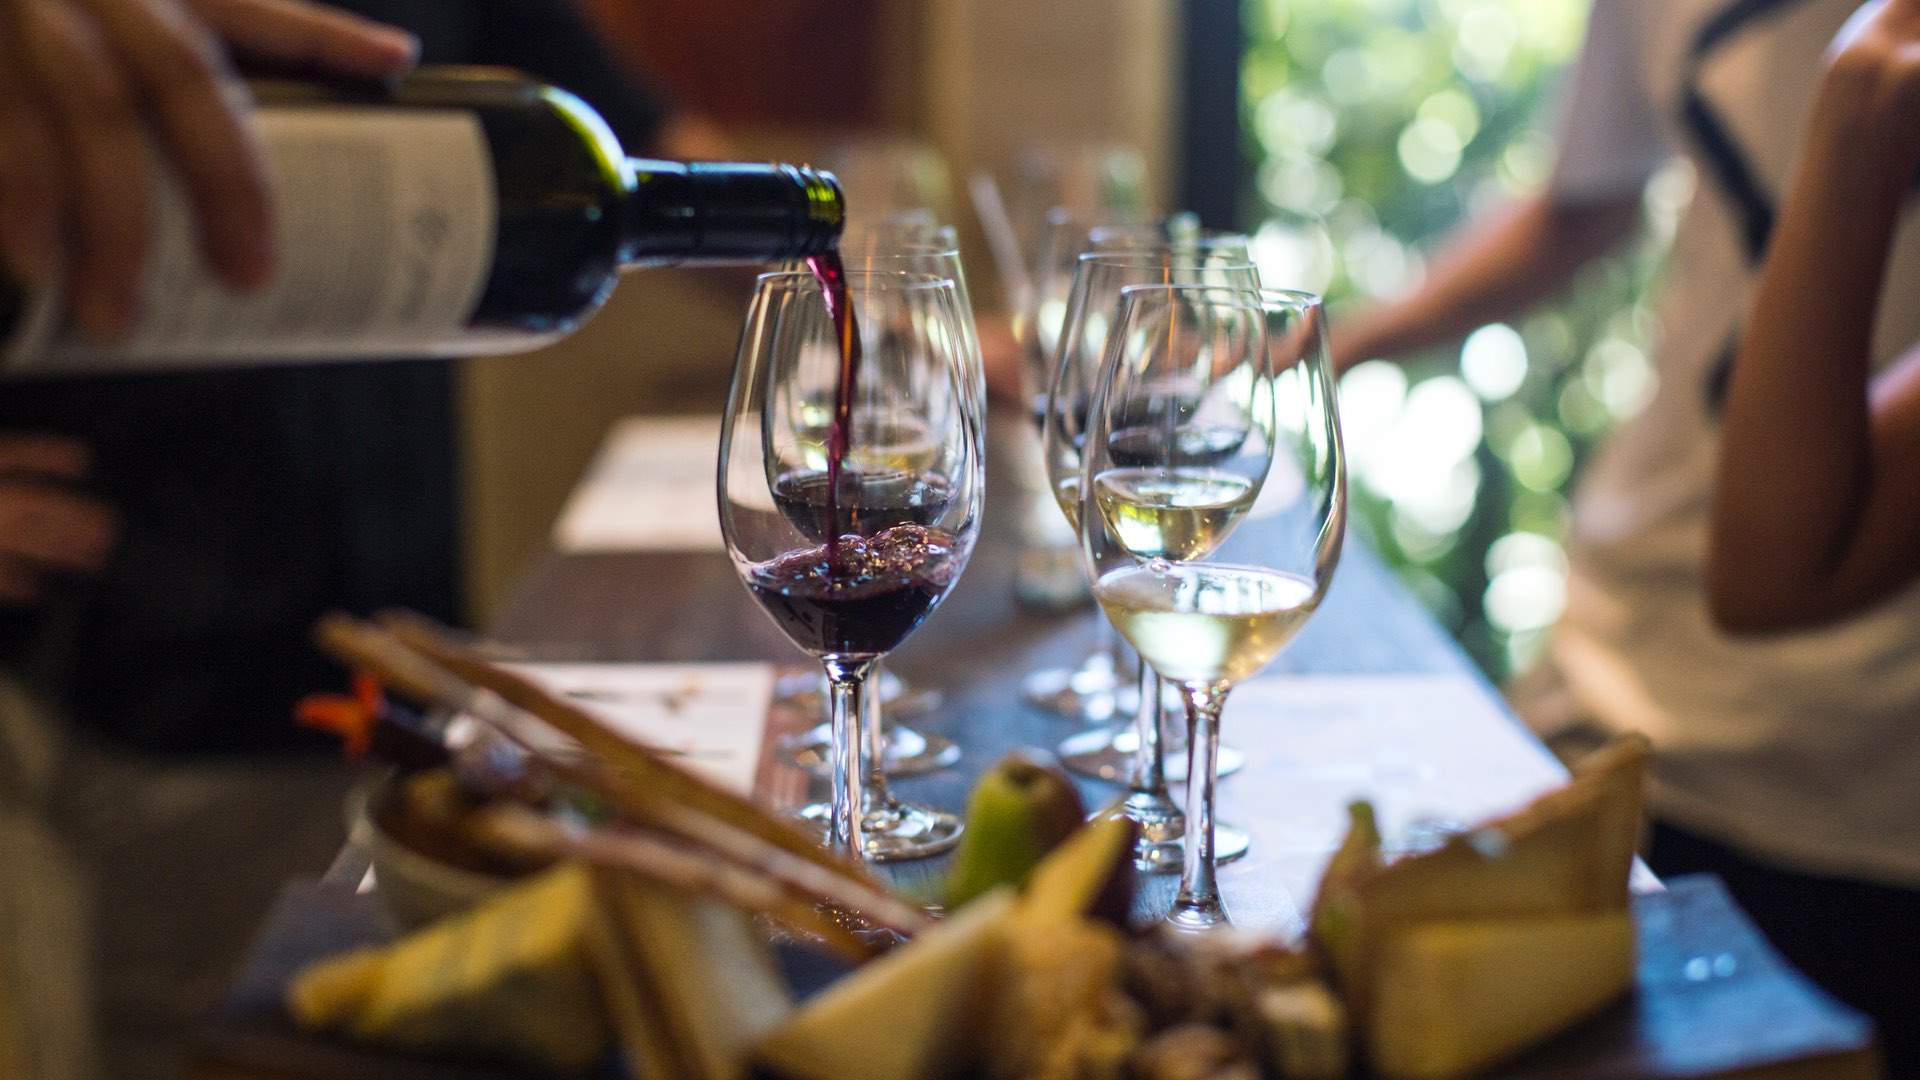 Sydney Is Getting a New (Very Reasonably Priced) Wine Festival